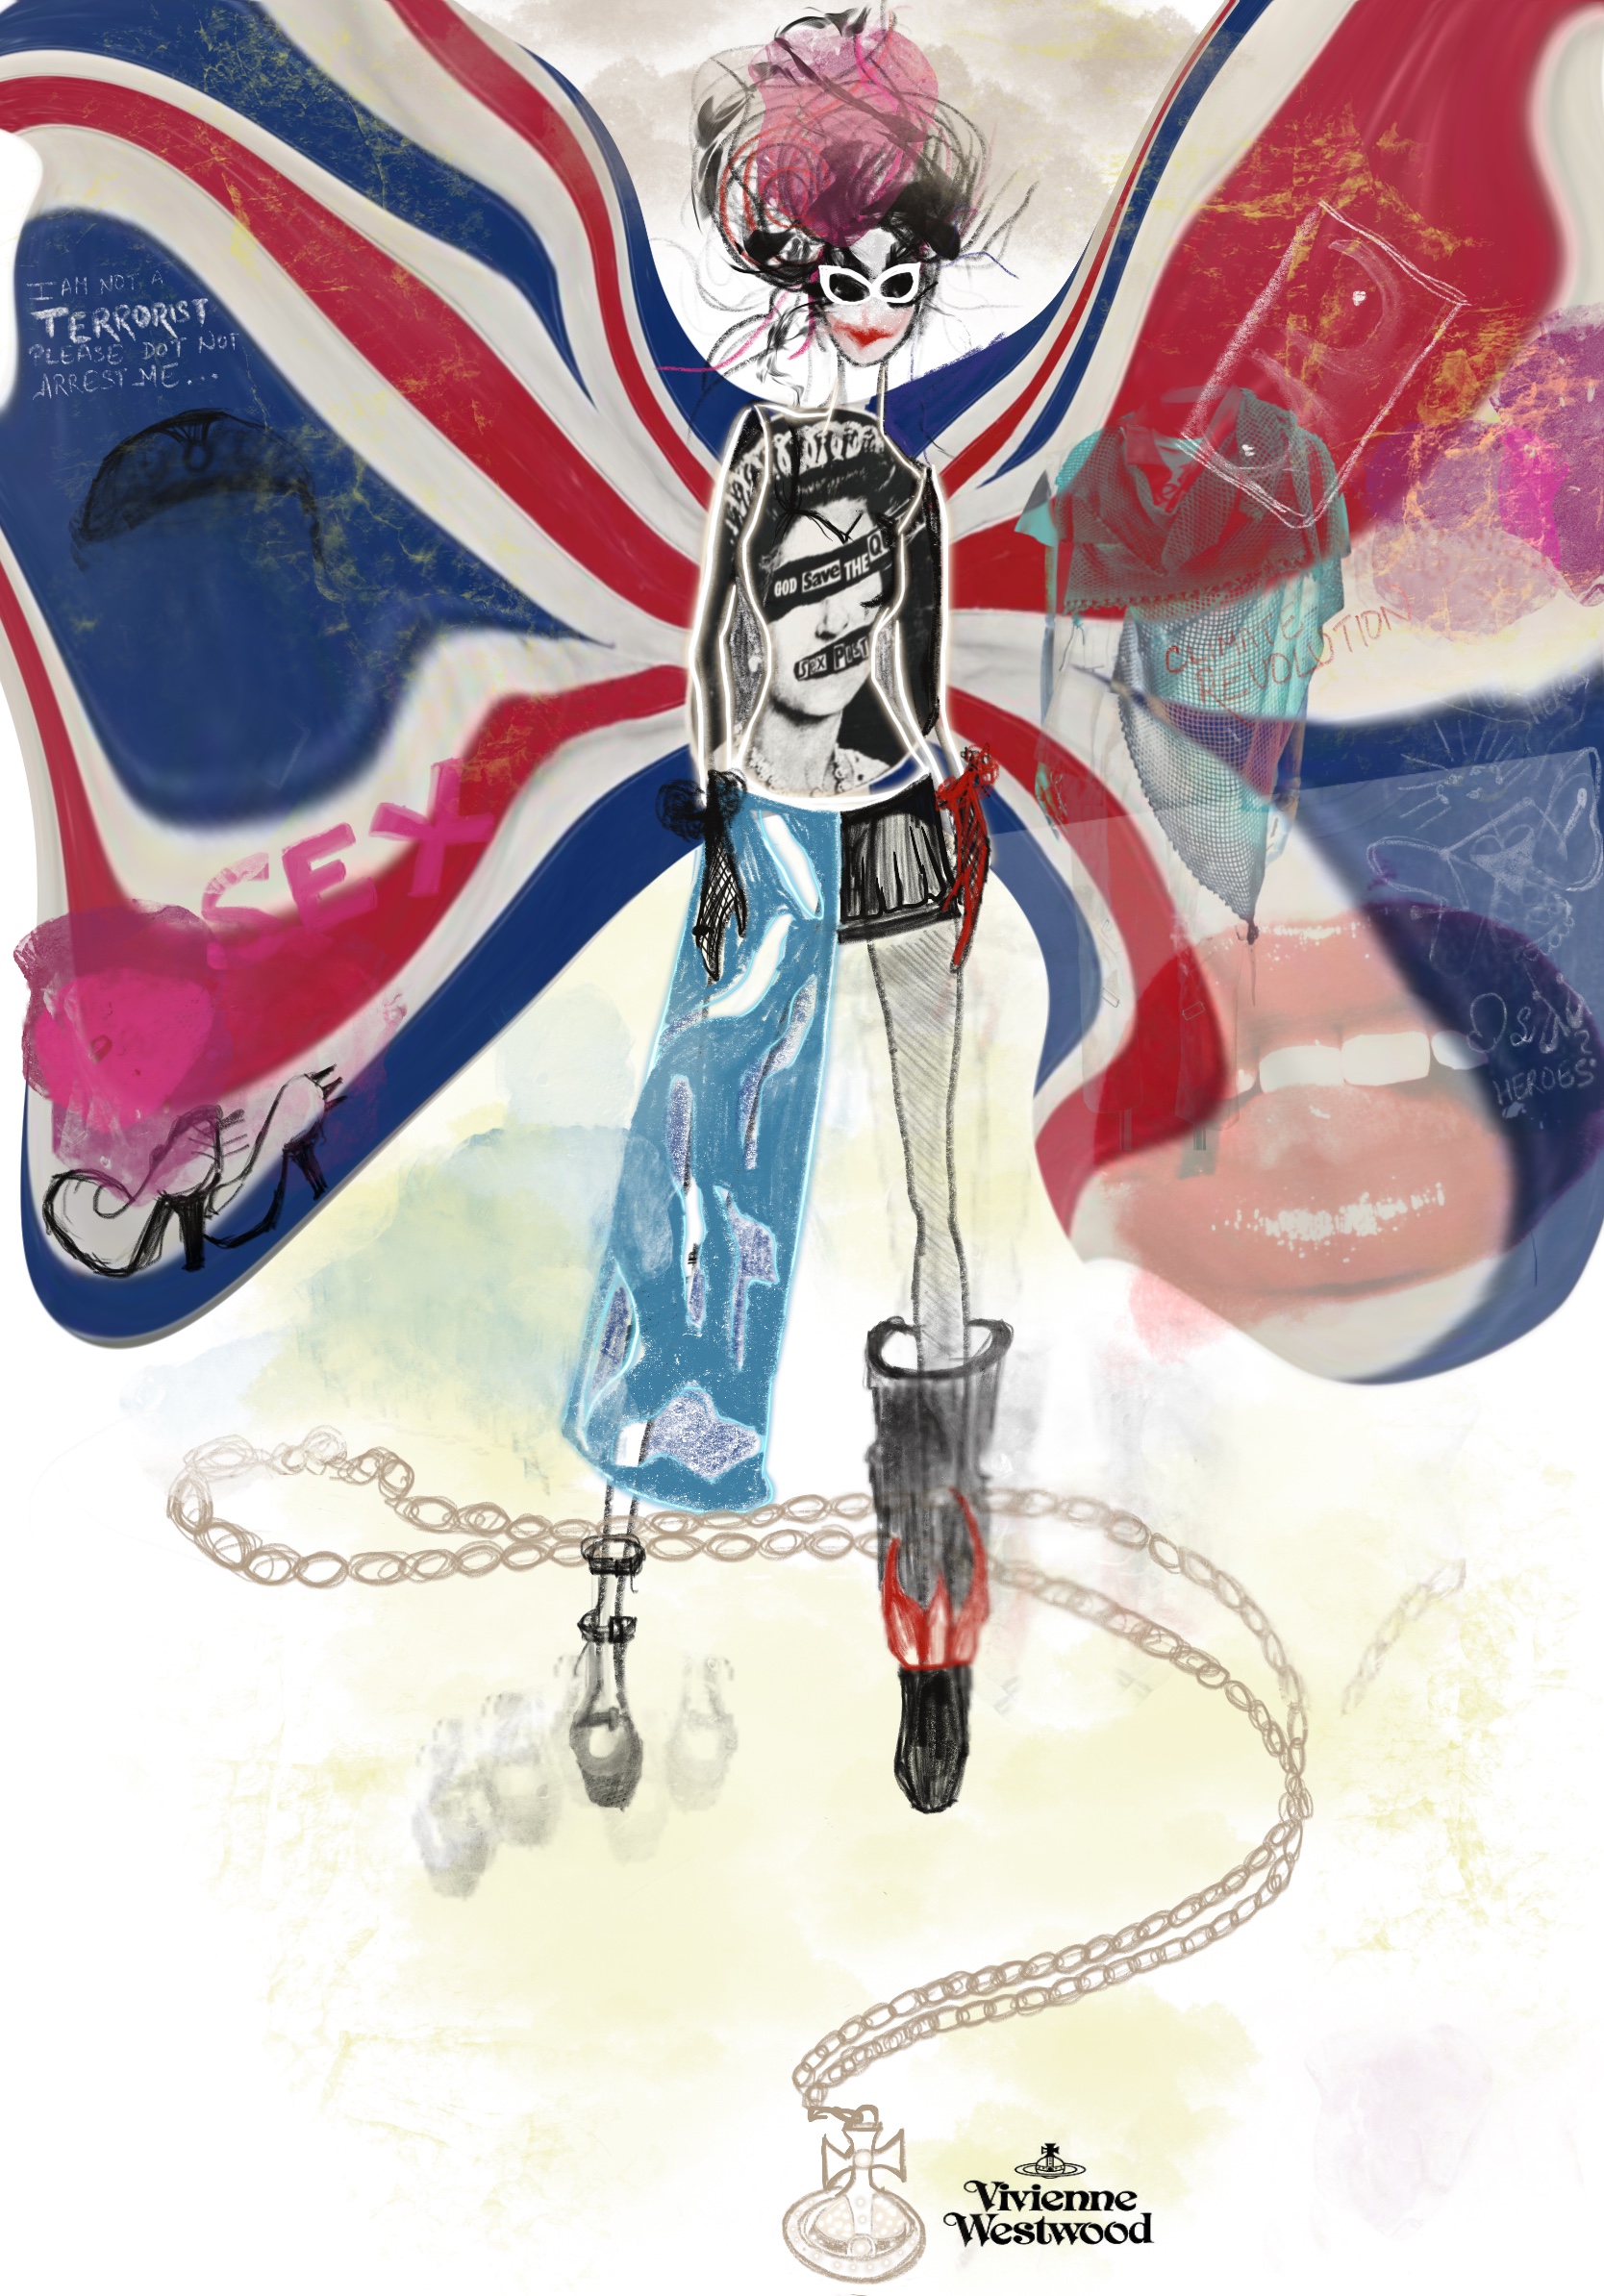 Illustration of a model wearing white-framed glasses, shorts and a top bearing a collage of Queen Elizabeth II's face with text imposed over her eyes and mouth. A union jack flag is billowing in the background.